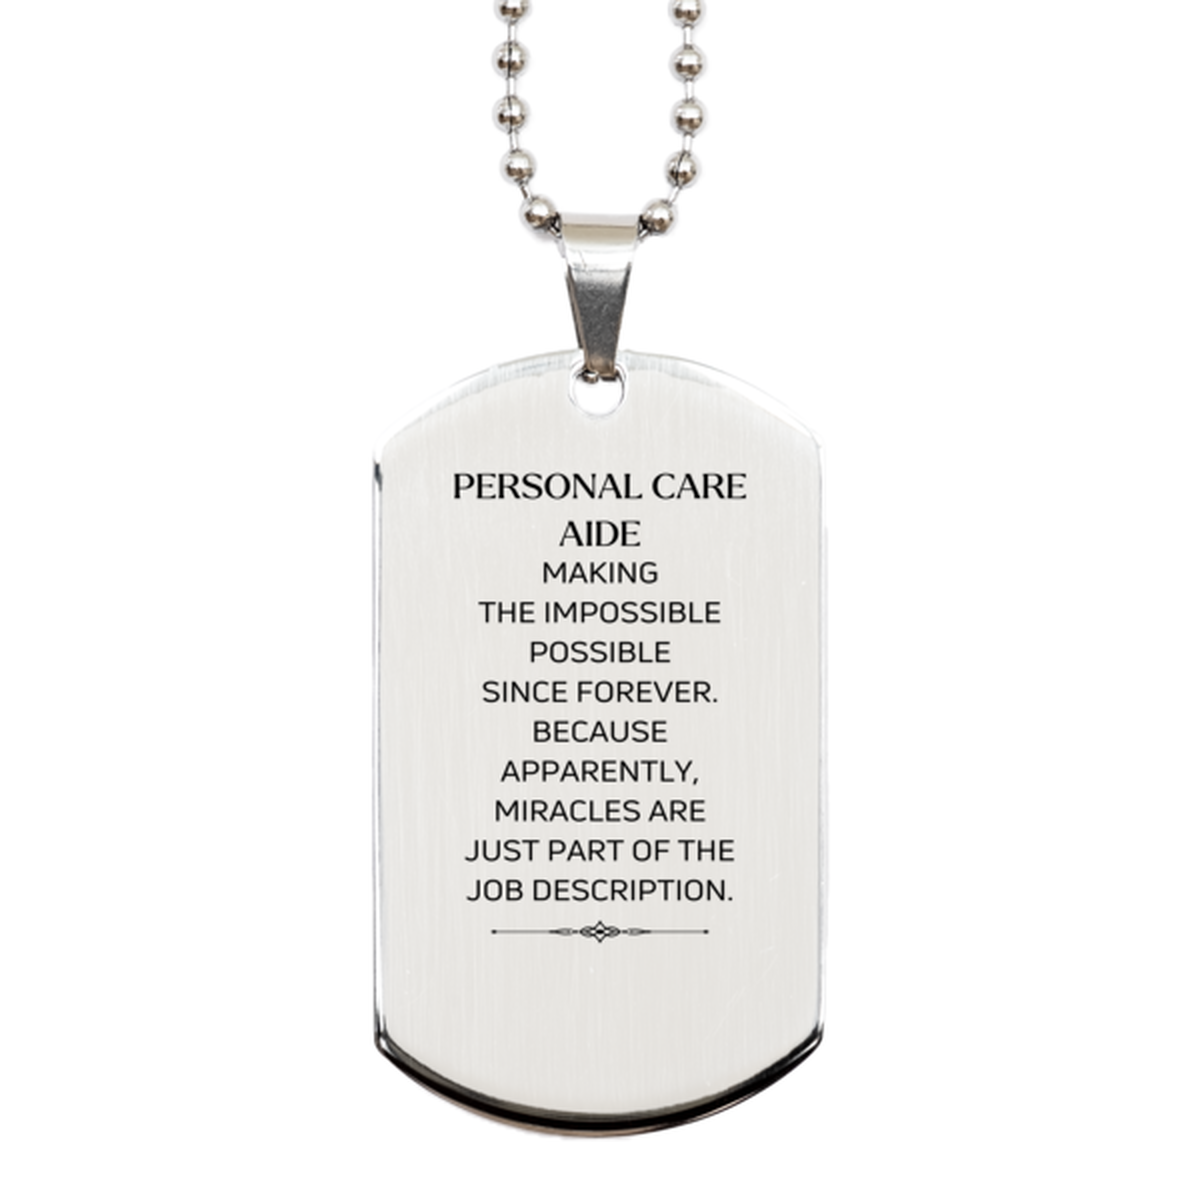 Funny Personal Care Aide Gifts, Miracles are just part of the job description, Inspirational Birthday Silver Dog Tag For Personal Care Aide, Men, Women, Coworkers, Friends, Boss